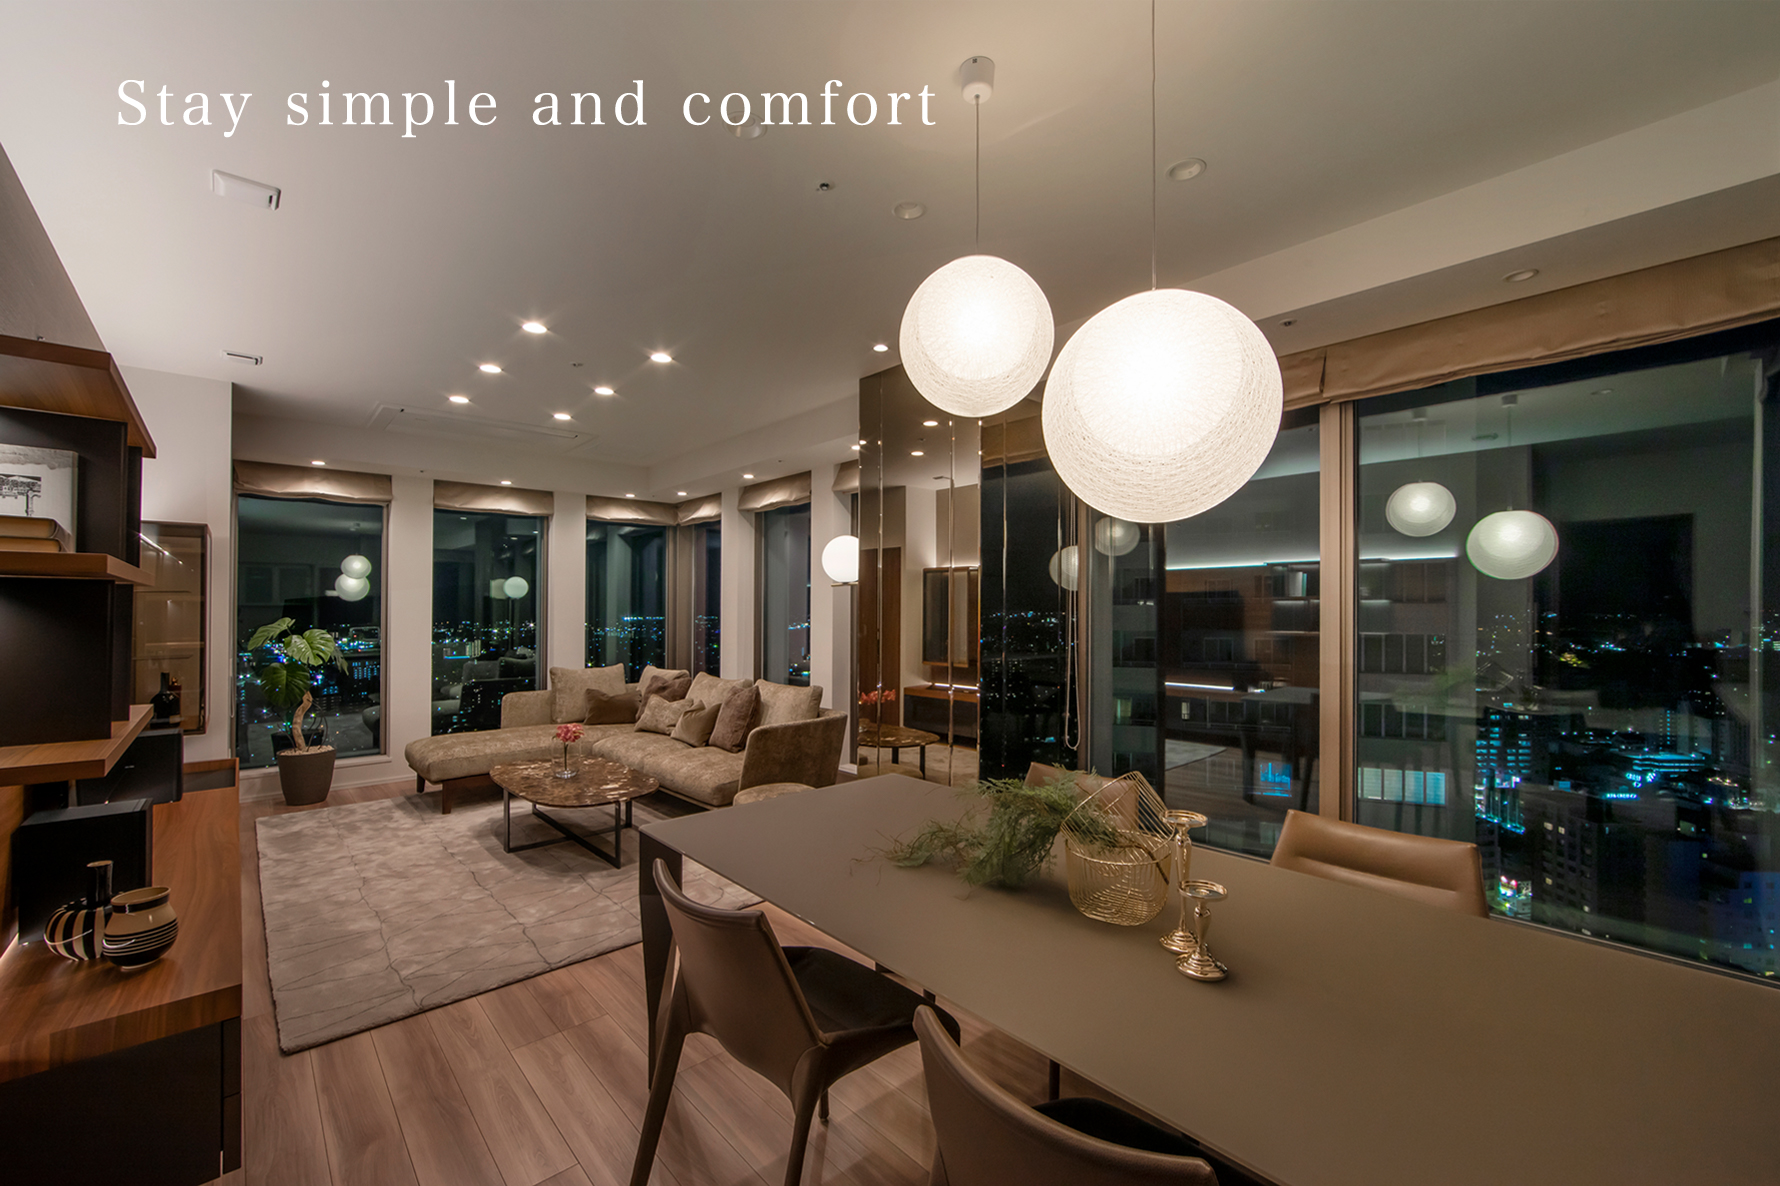 Stay simple and comfort